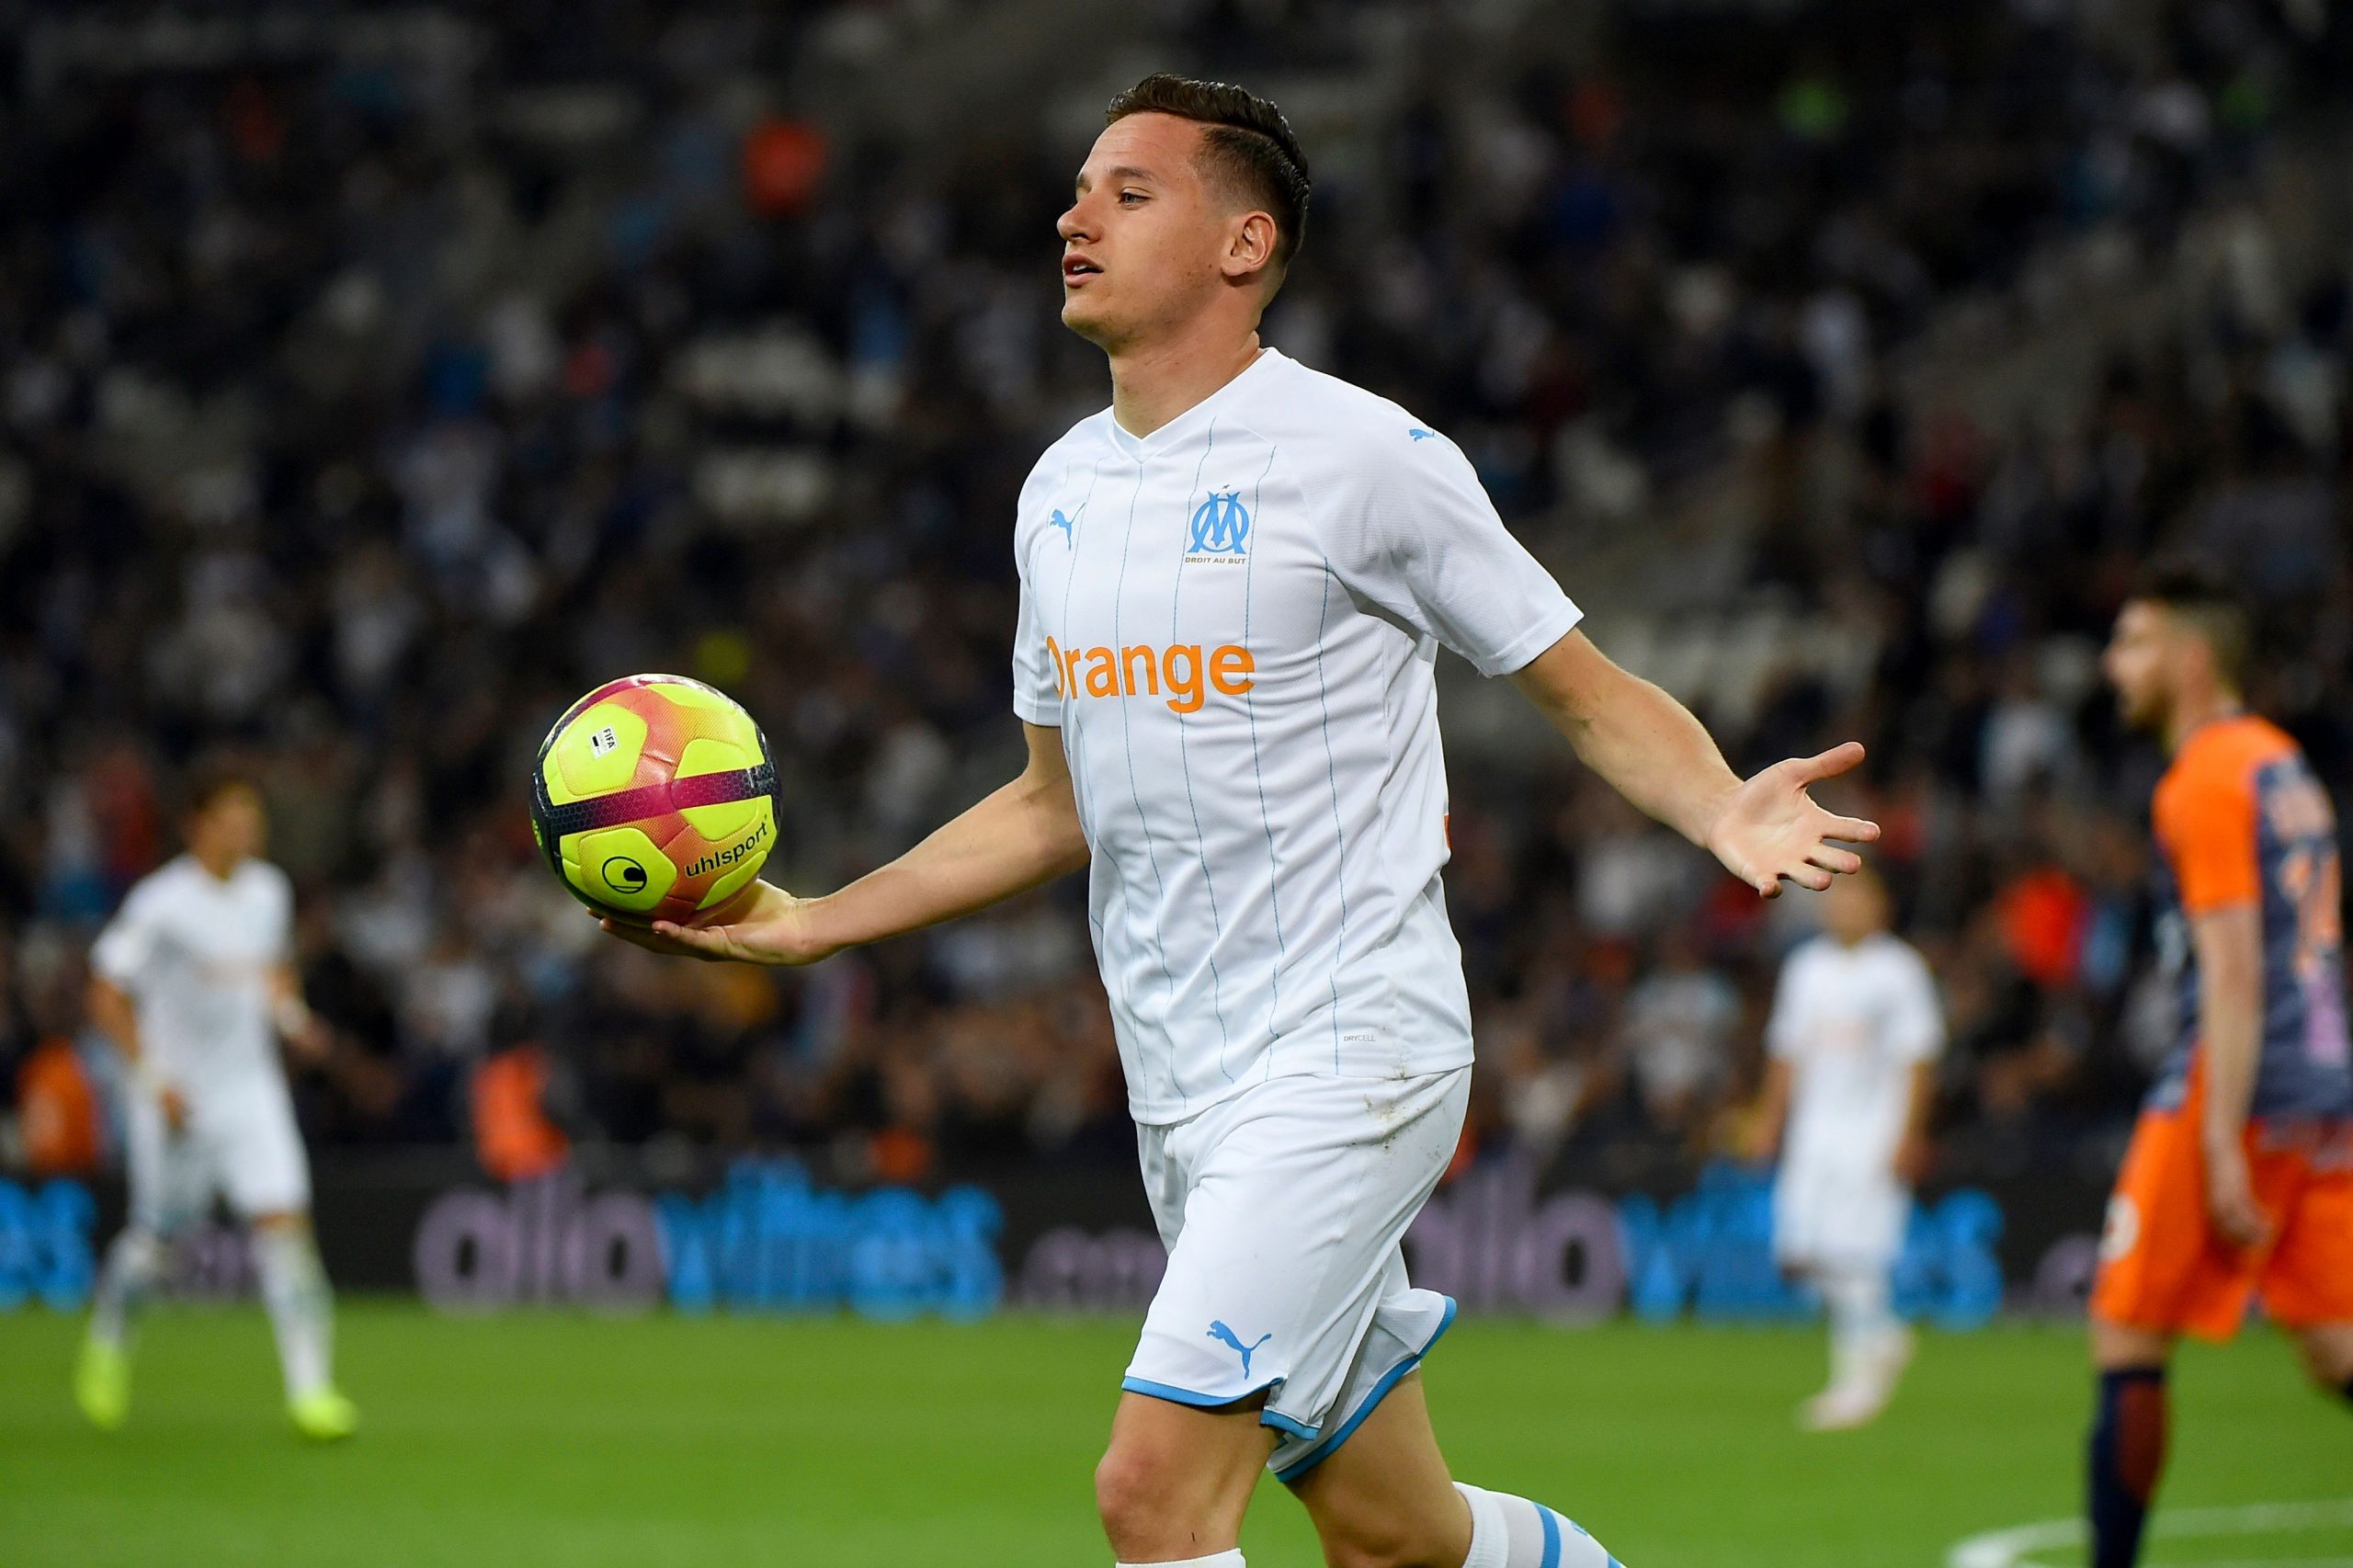 Florian Thauvin celebrates after scoring a goal (Getty Images)